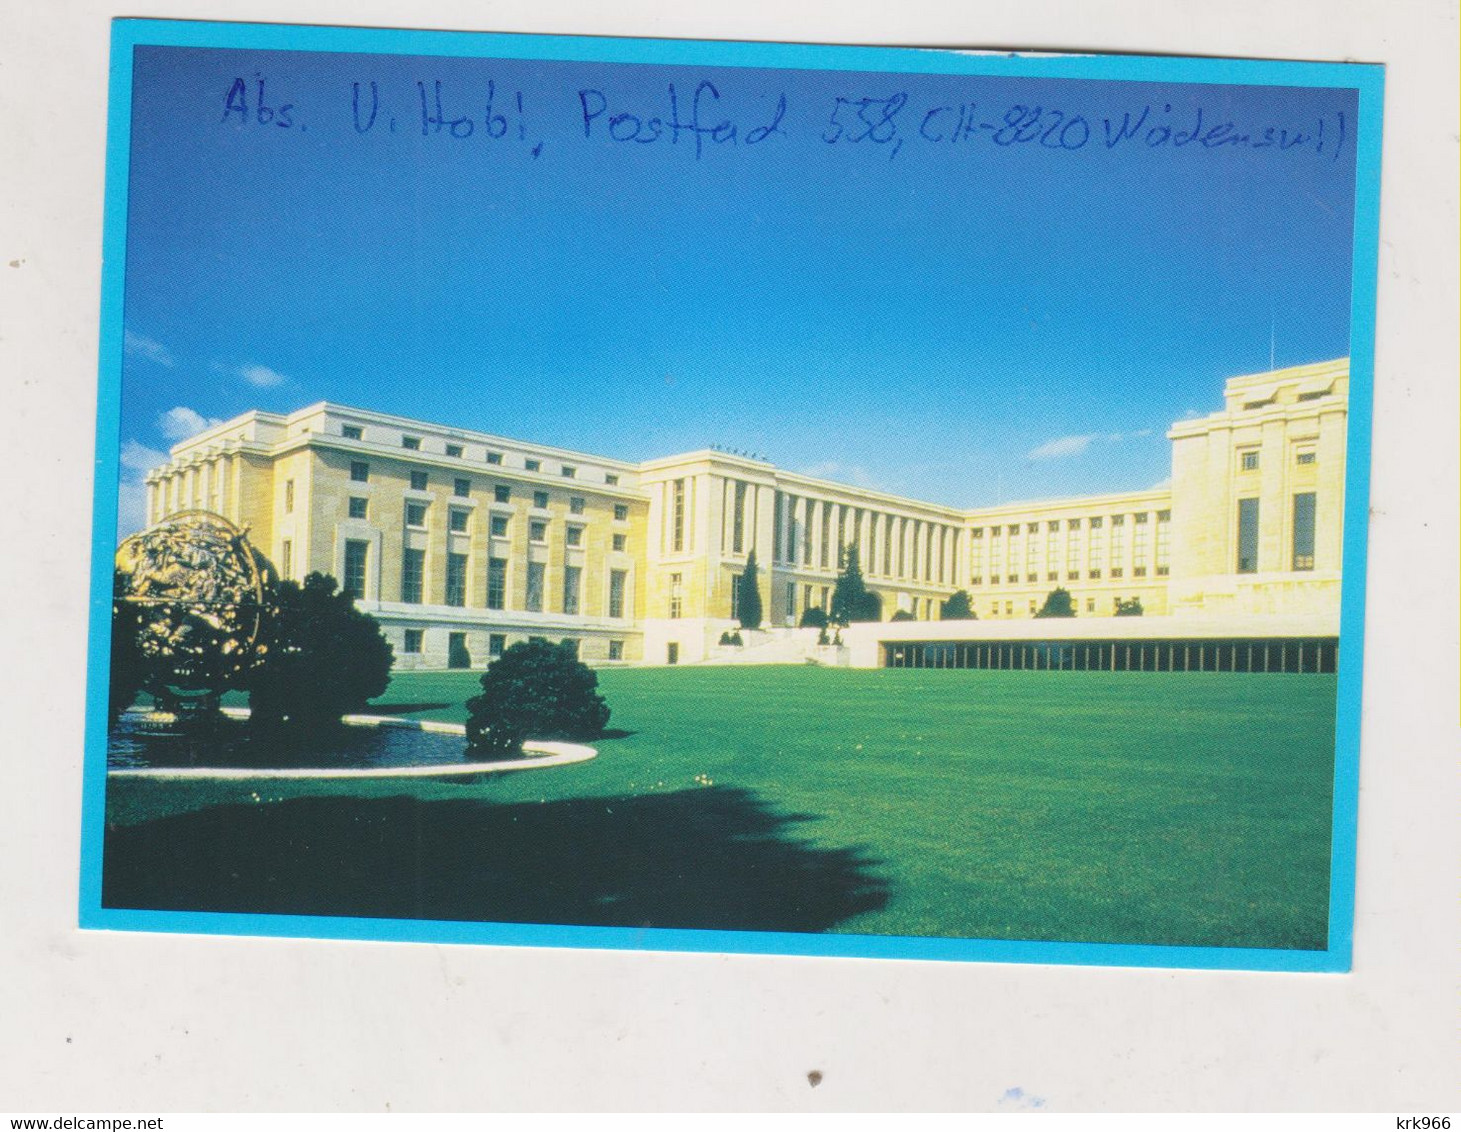 UNITED NATIONS GENEVE 2008 Nice Postcard (part Of Parcel) Used With 3 X 10 Fr Value To Austria - Cartas & Documentos